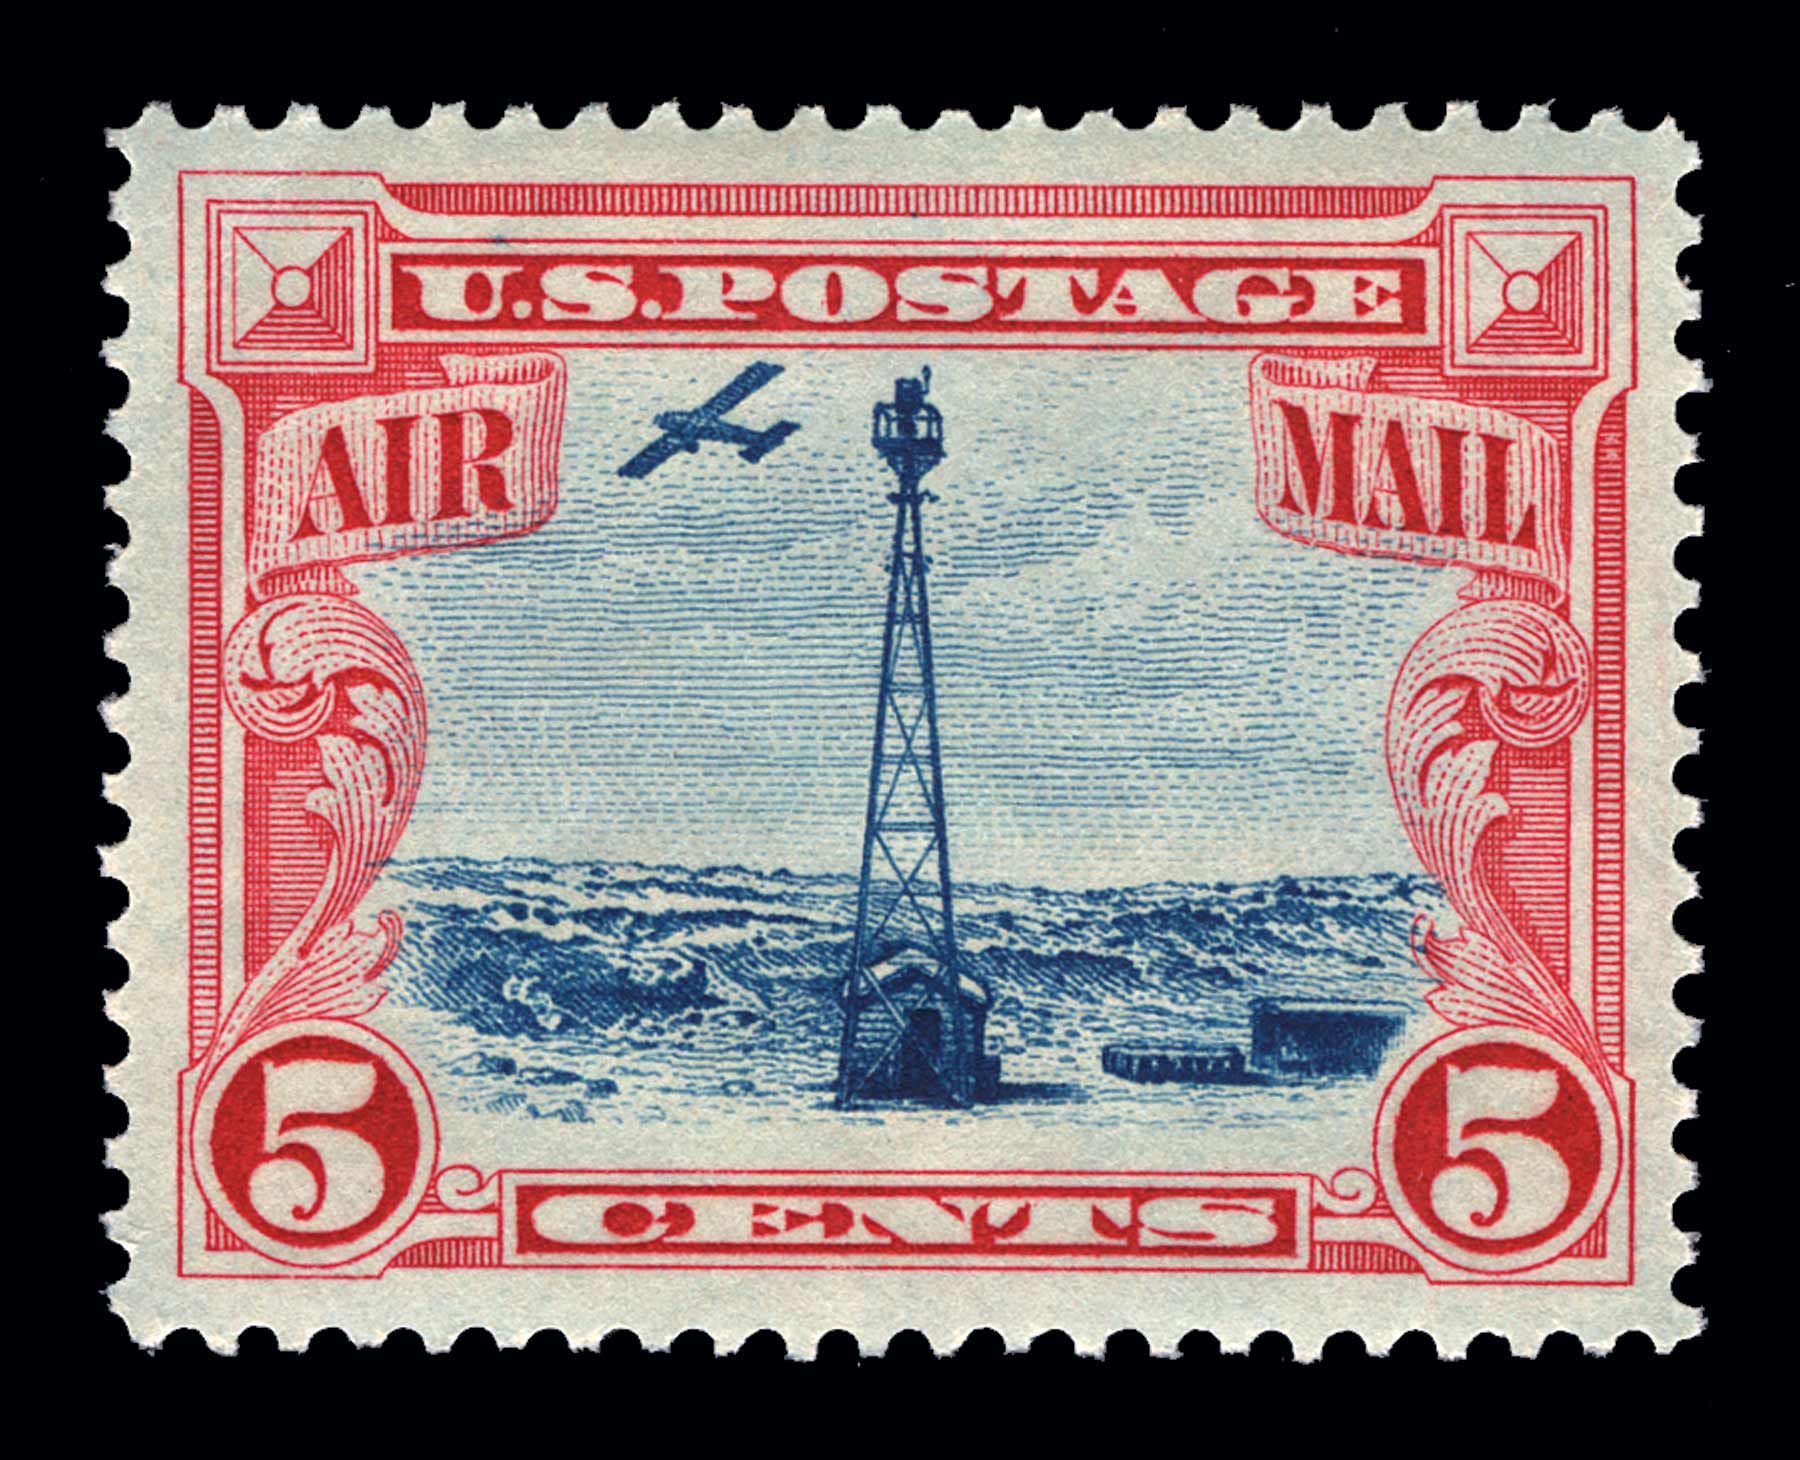 5 cent airmail stamp